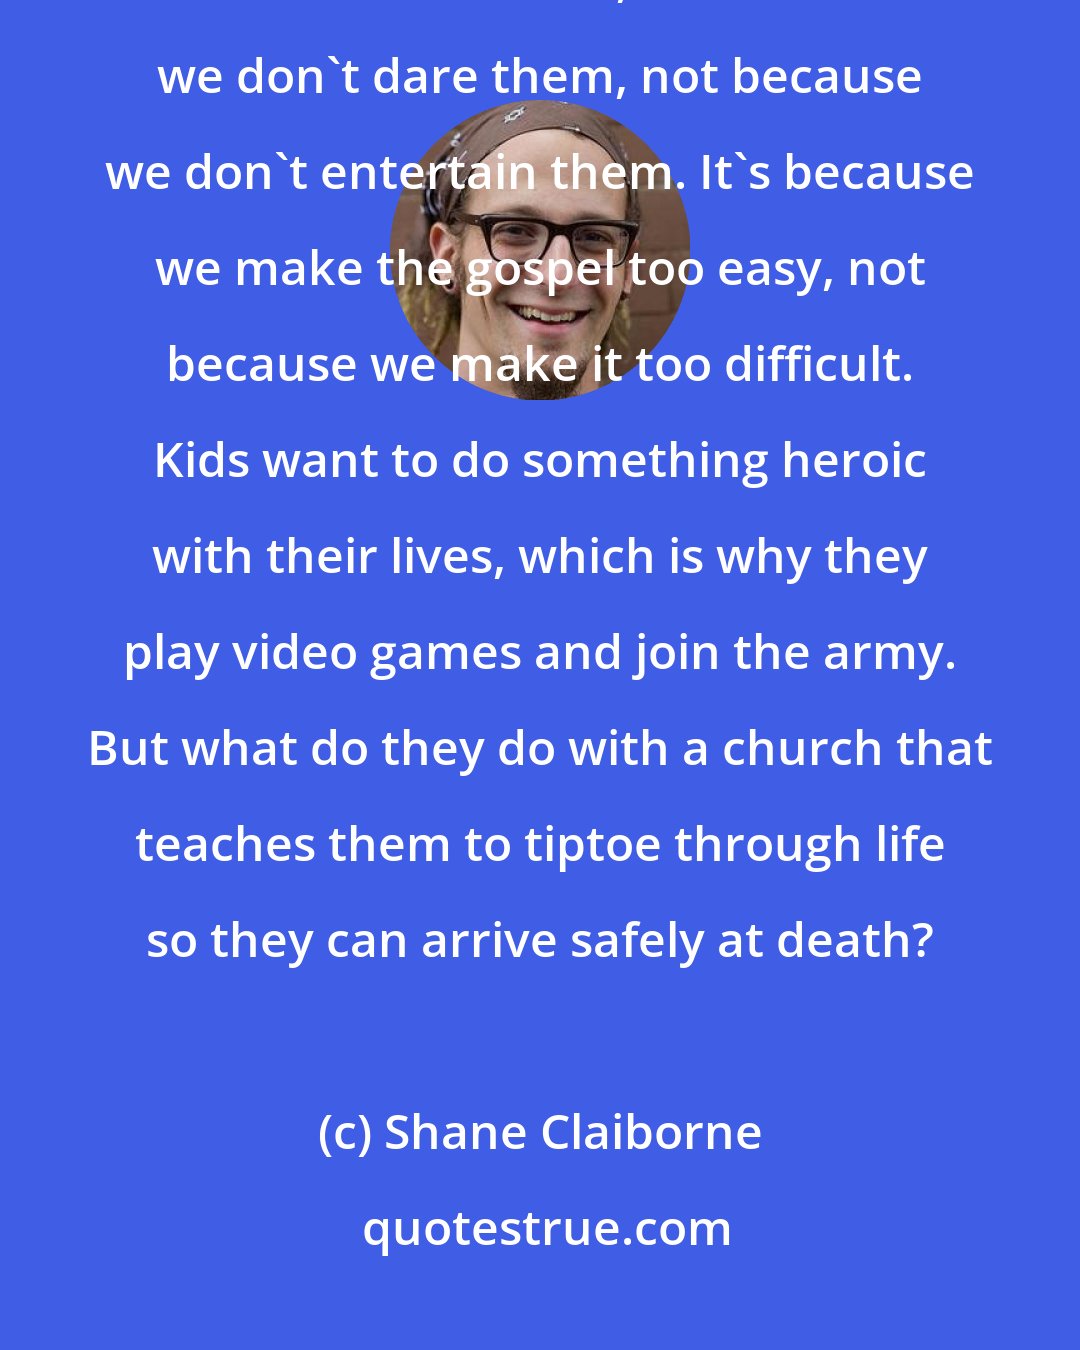 Shane Claiborne: I am convinced that if we lose kids to the culture of drugs and materialism, of violence and war, it's because we don't dare them, not because we don't entertain them. It's because we make the gospel too easy, not because we make it too difficult. Kids want to do something heroic with their lives, which is why they play video games and join the army. But what do they do with a church that teaches them to tiptoe through life so they can arrive safely at death?